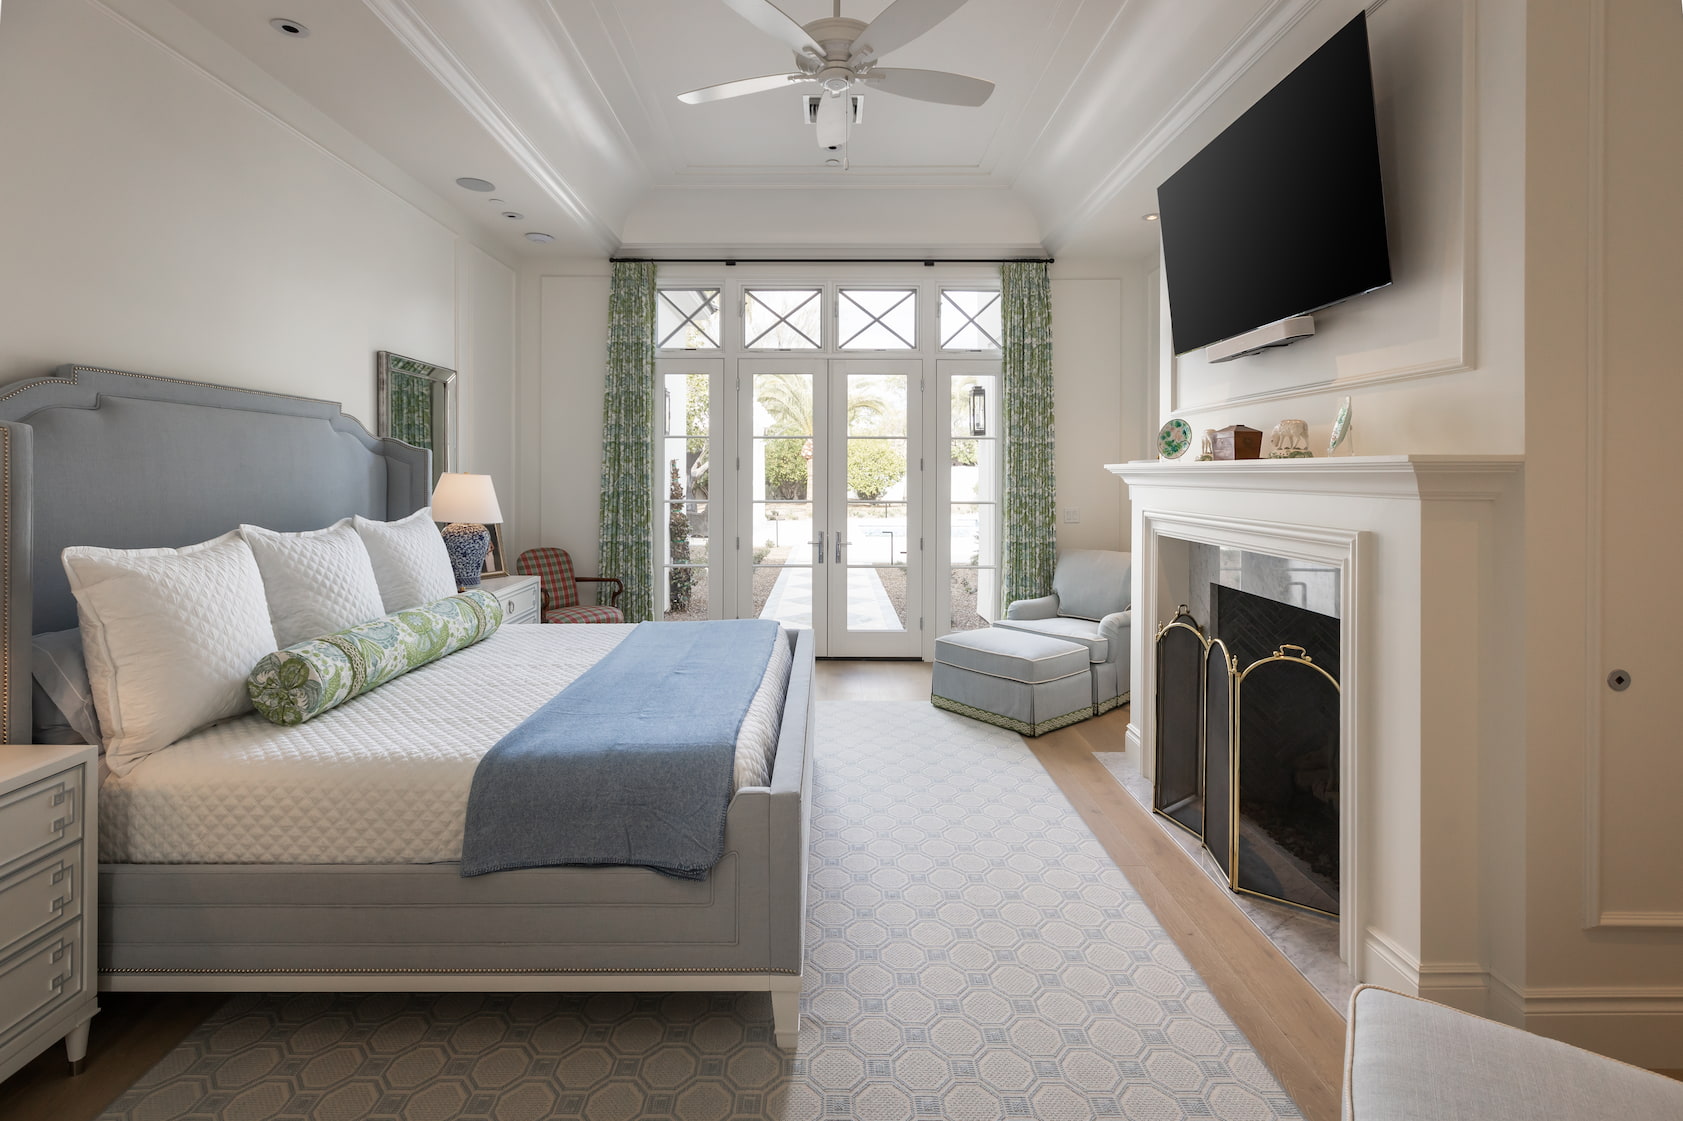 A sophisticated bedroom features a large bed, fireplace and custom French doors leading to the backyard.